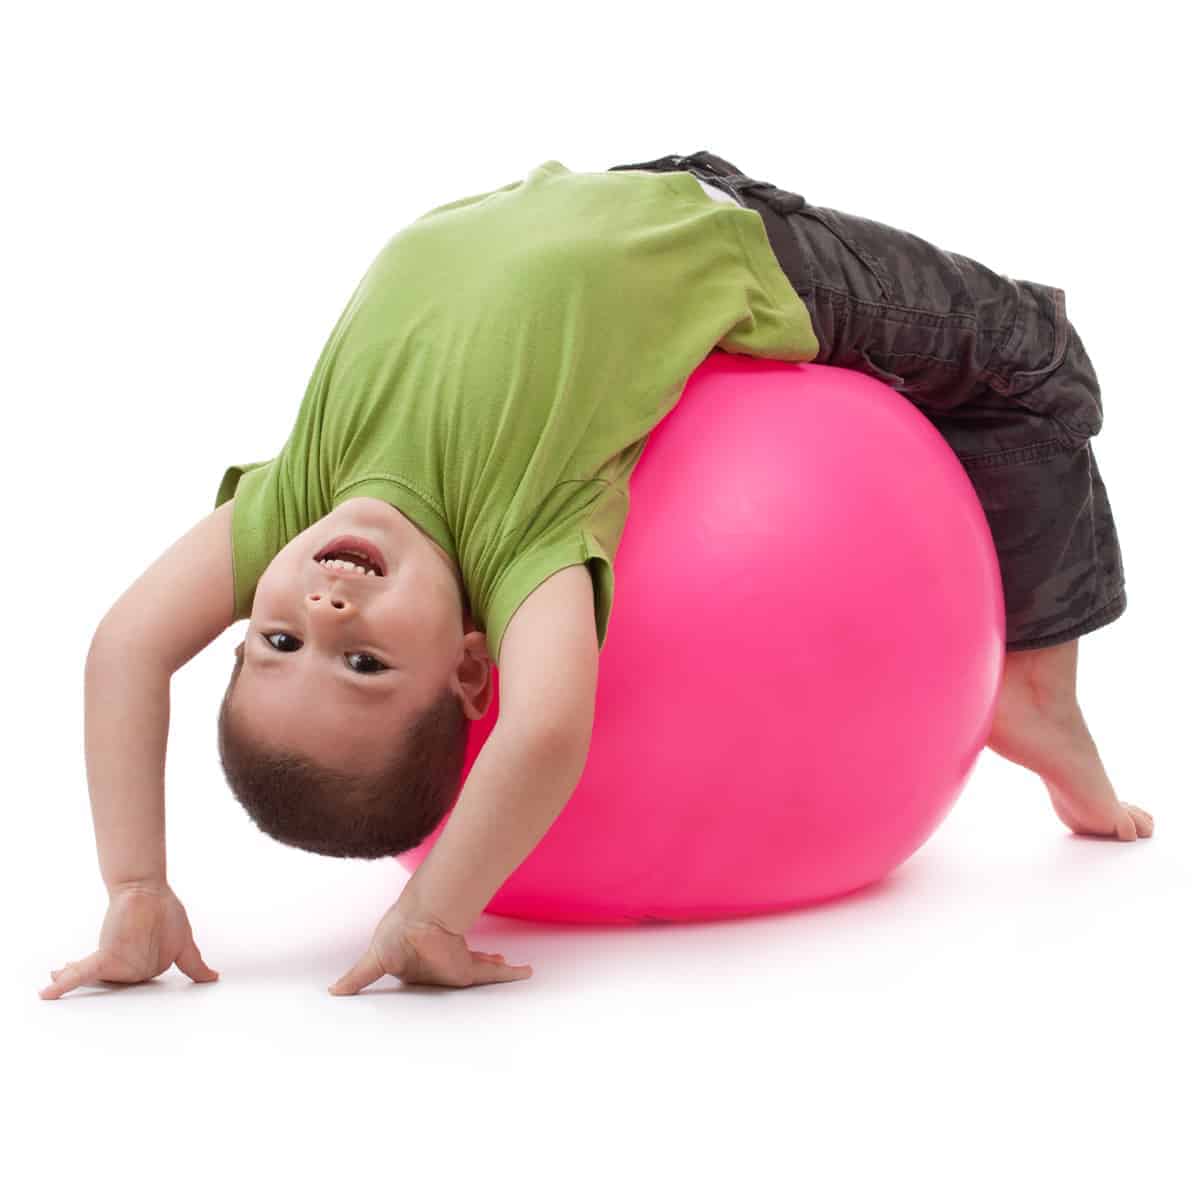 Discover over 45 vestibular activities that can calm, regulate, and improve attention in your child. Plus, get vestibular exercises for kids that seek or avoid vestibular input.